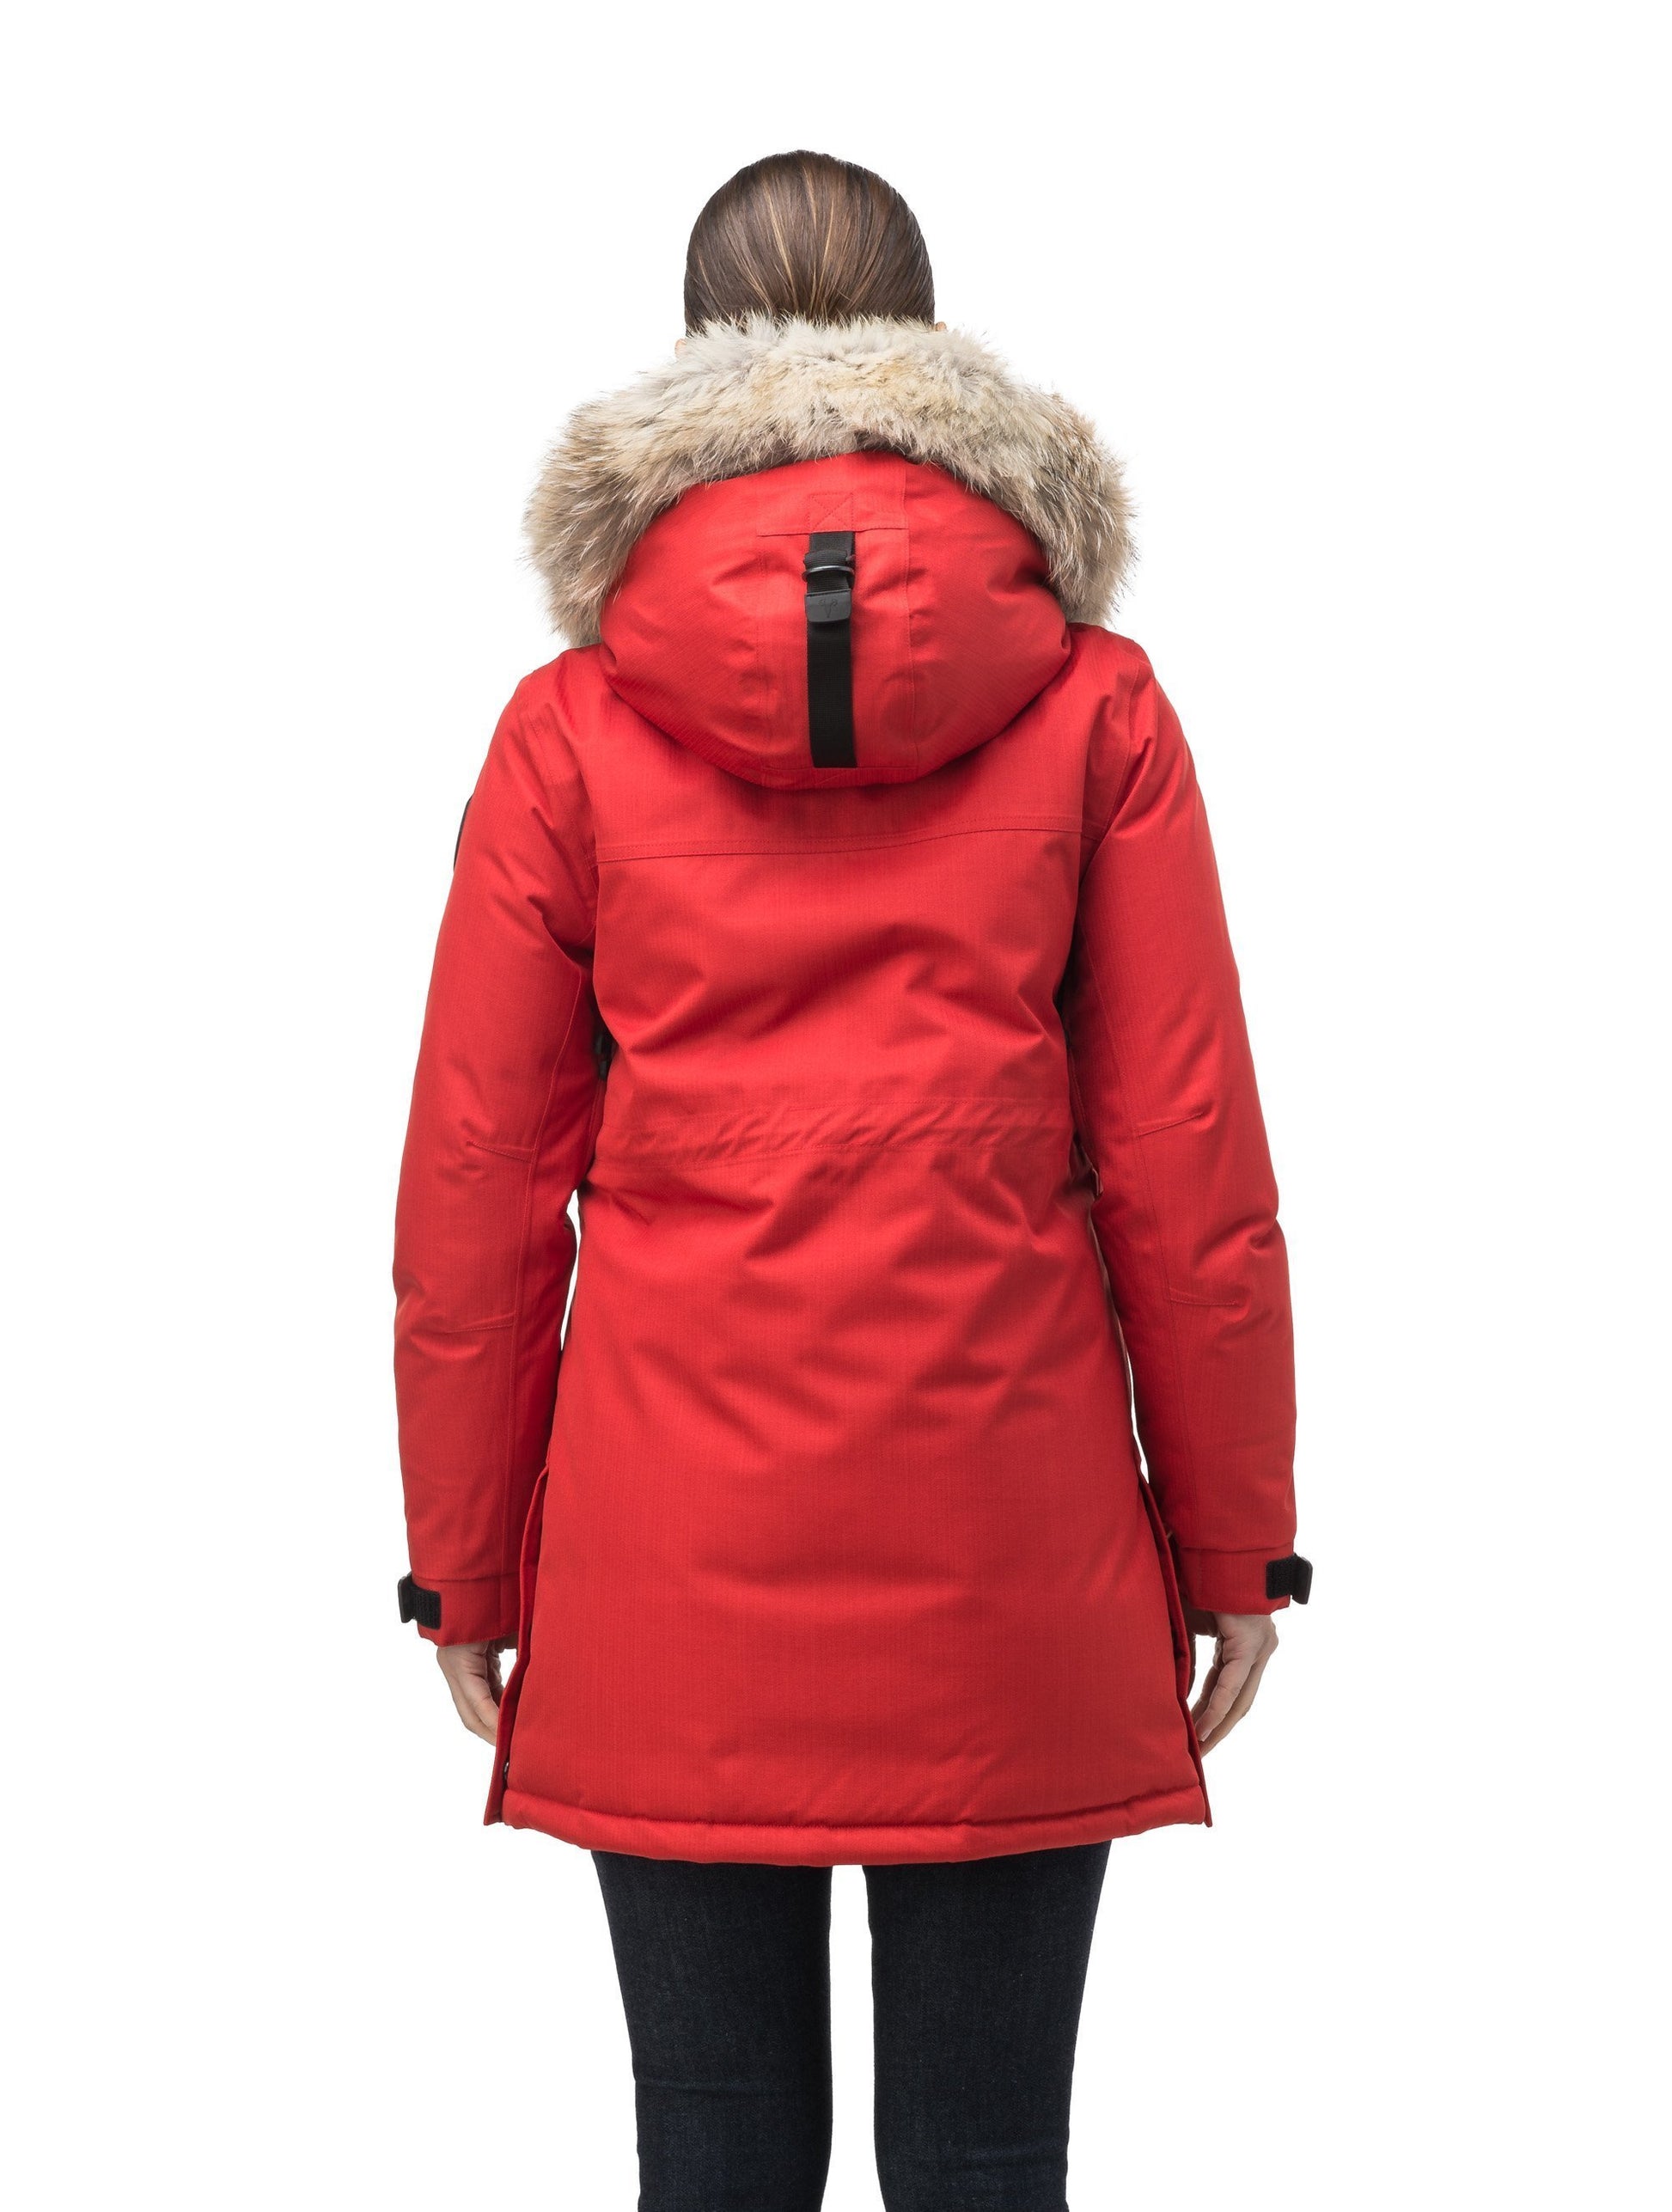 Thigh length women's down filled parka with side entry pockets and drawcord waist, removable hood and fur trim in Vermillion